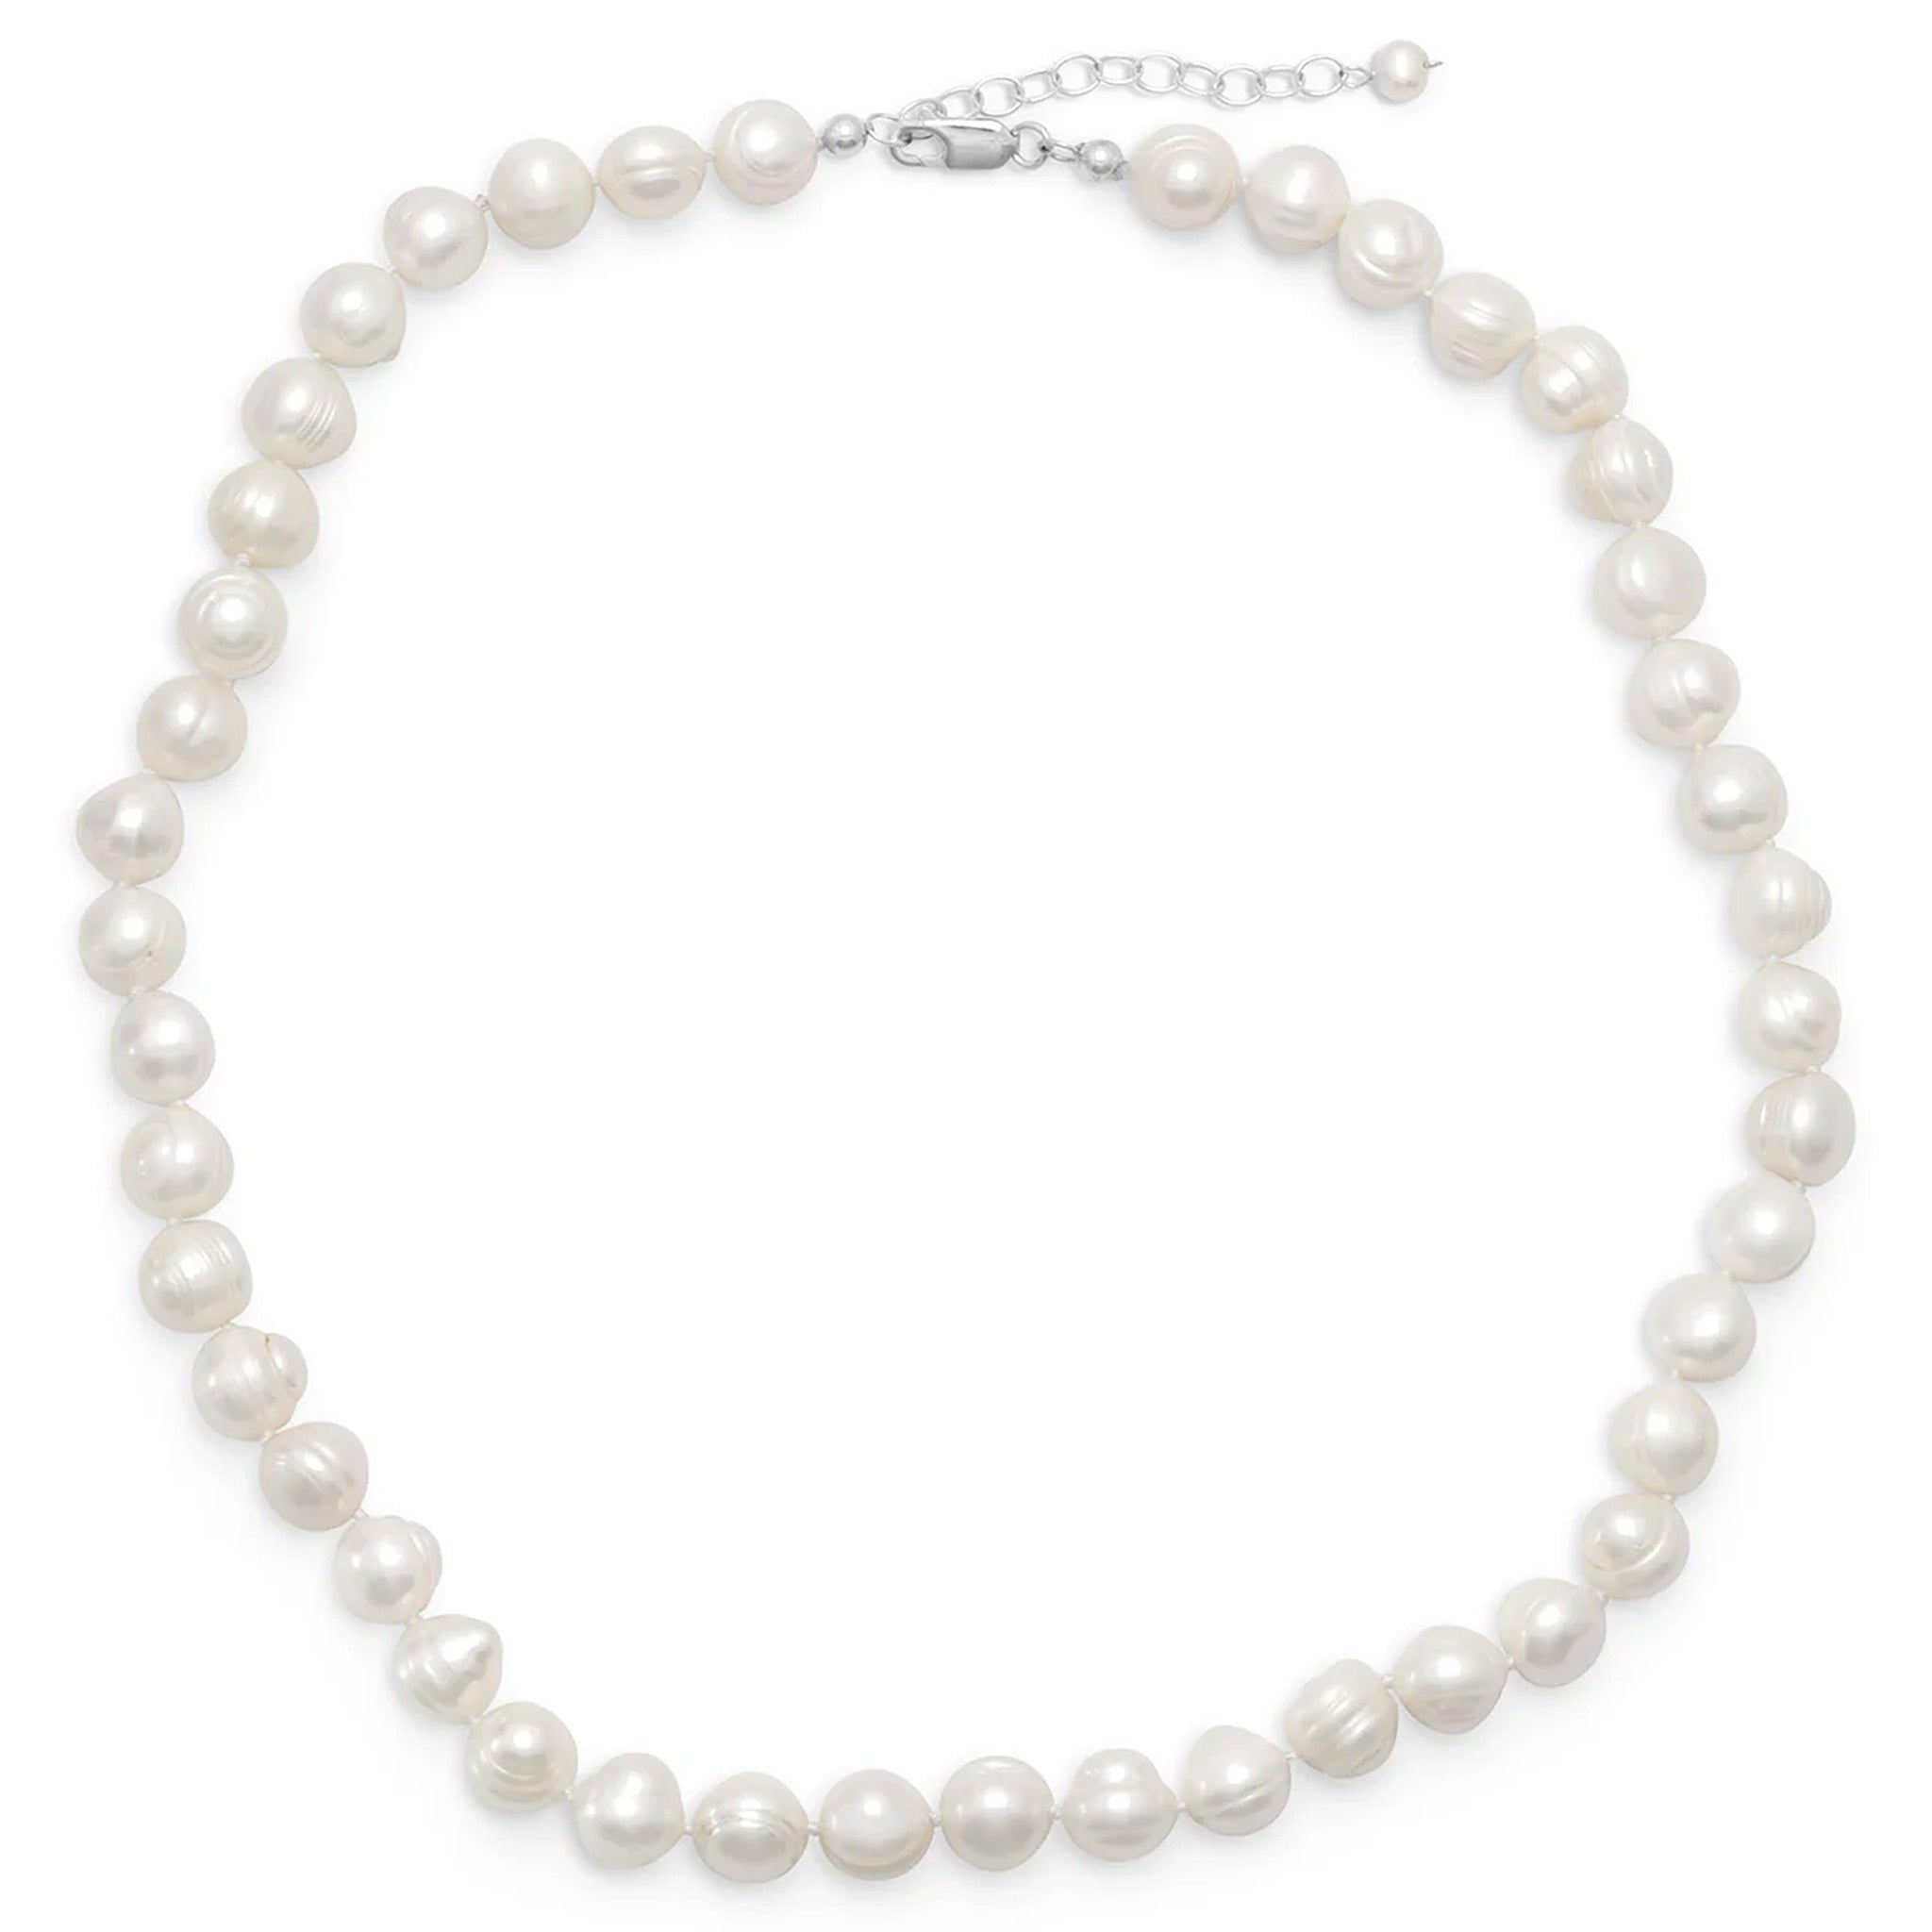 White Cultured Freshwater Pearl Necklace